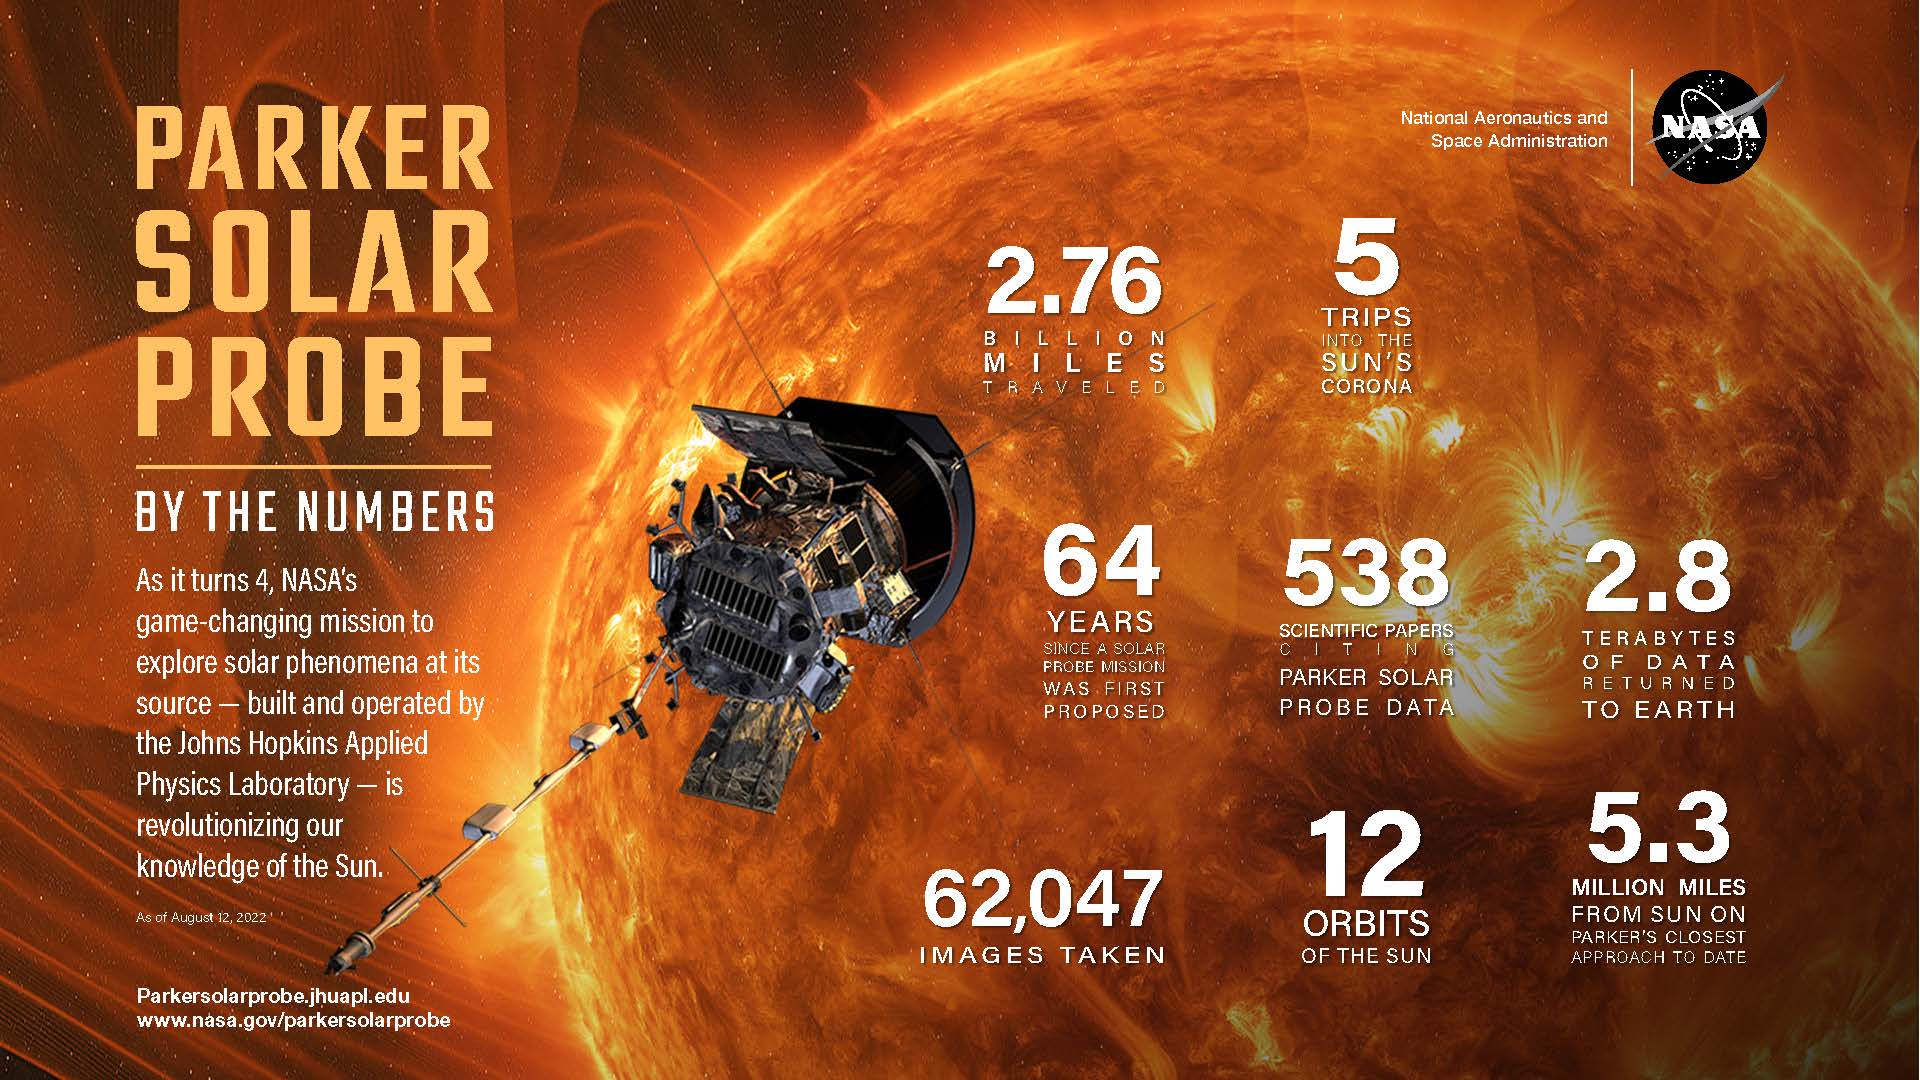 Parker Solar Probe:: Parker Solar Probe Thriving Four Years after Launch